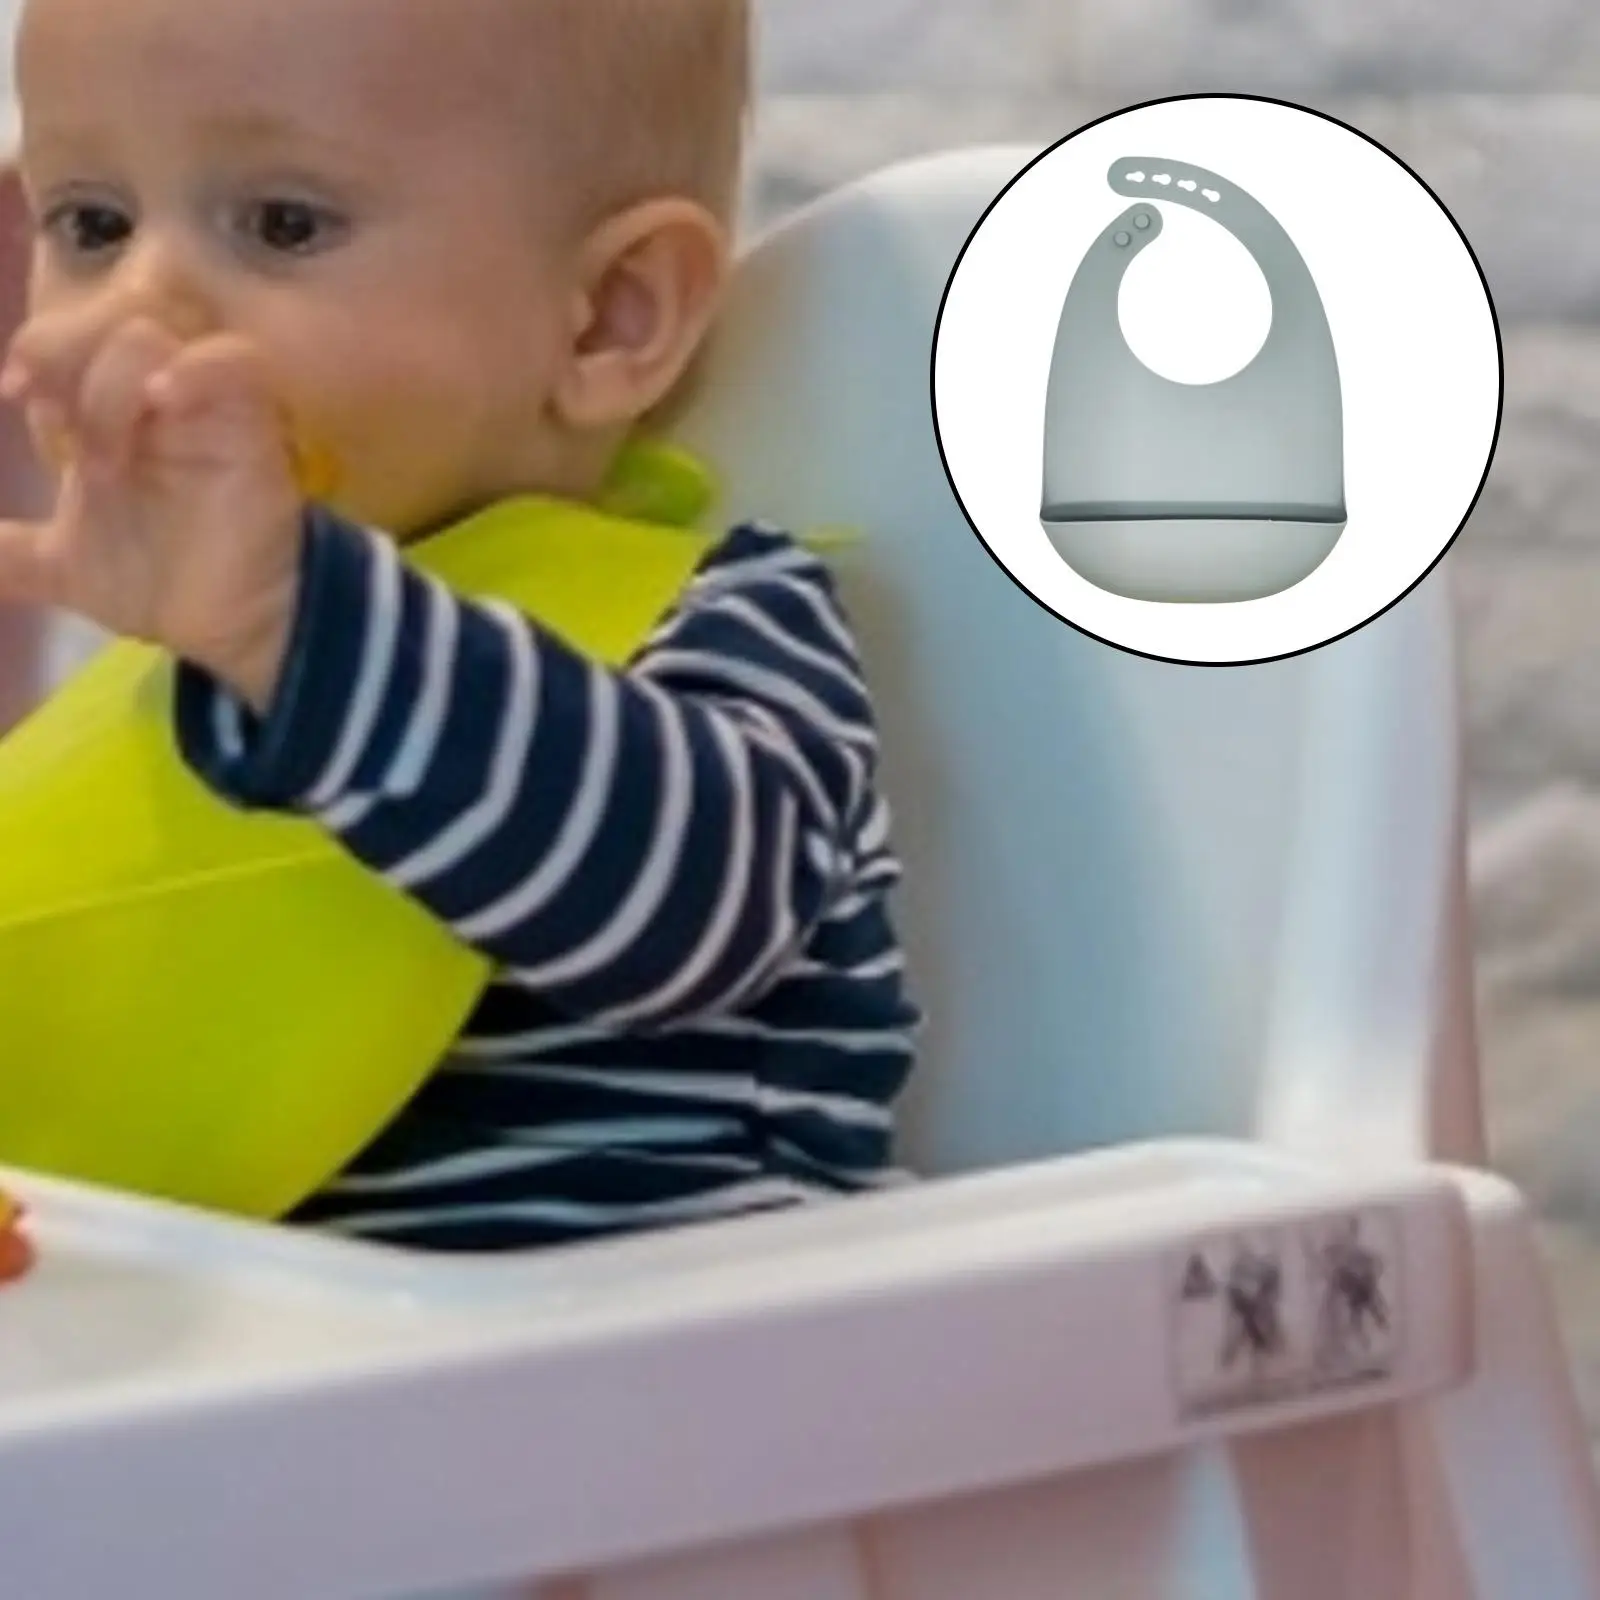 Adjustable Waterproof Silicone Baby Feeding Bib Eating Drinking Apron Cloth Protection for Toddler Wipe Clean Ligthweight